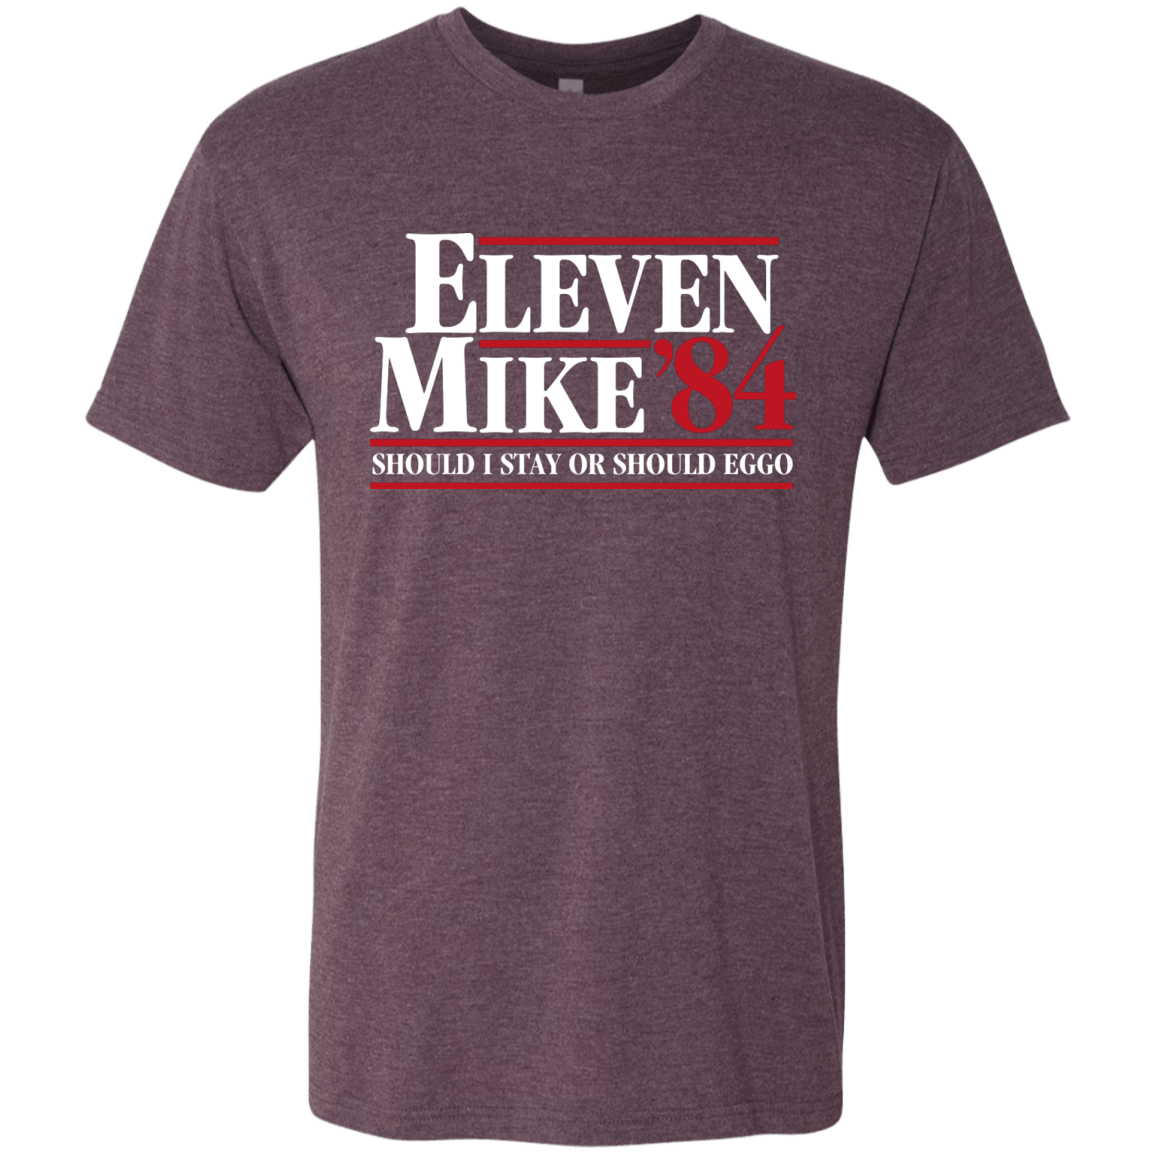 T-Shirts Vintage Purple / Small Eleven Mike 84 - Should I Stay or Should Eggo Men's Triblend T-Shirt